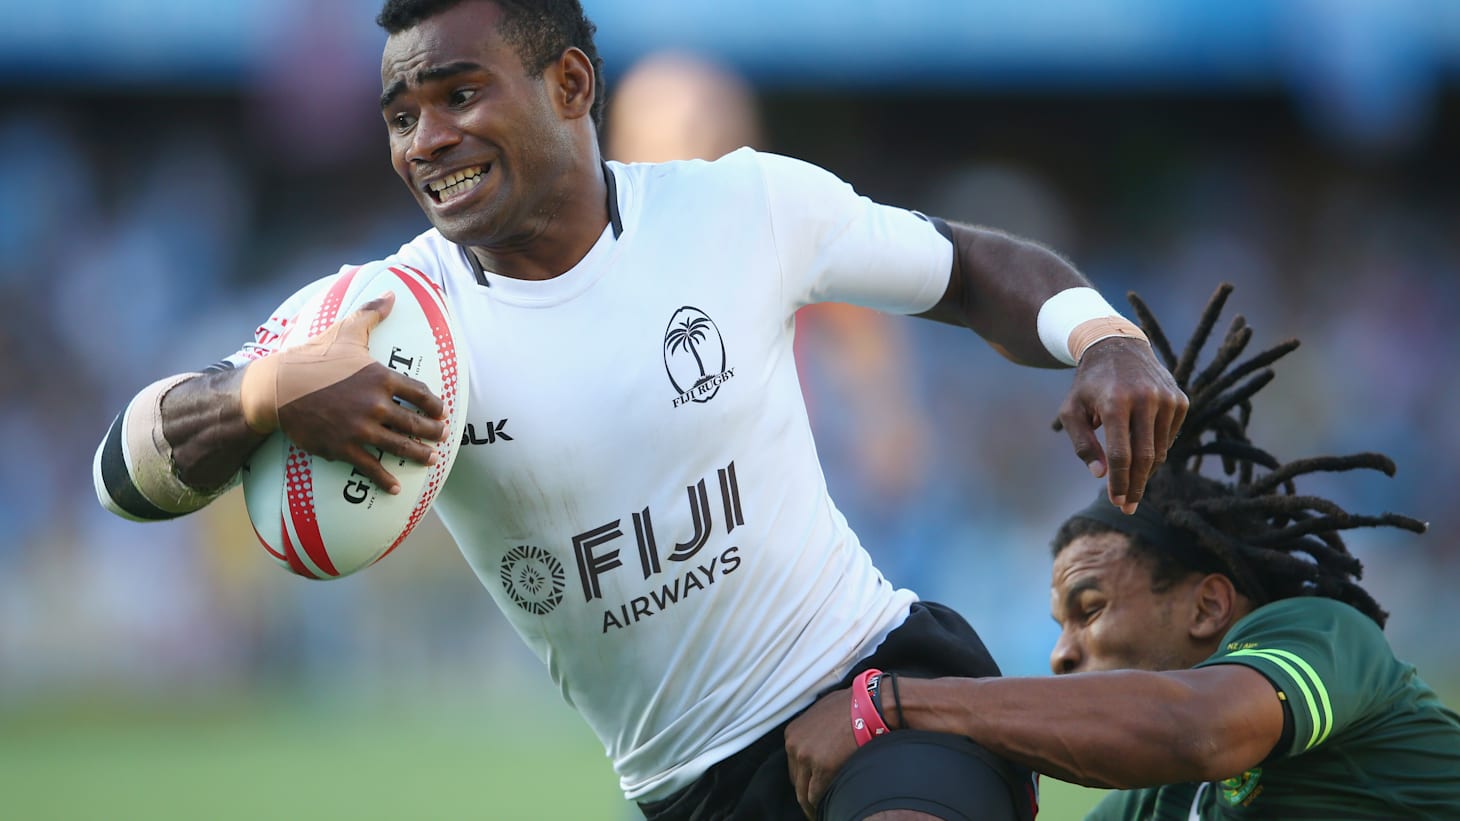 Fiji rugby star Jerry Tuwai reveals why he wrote knife and fork on his rugby boots